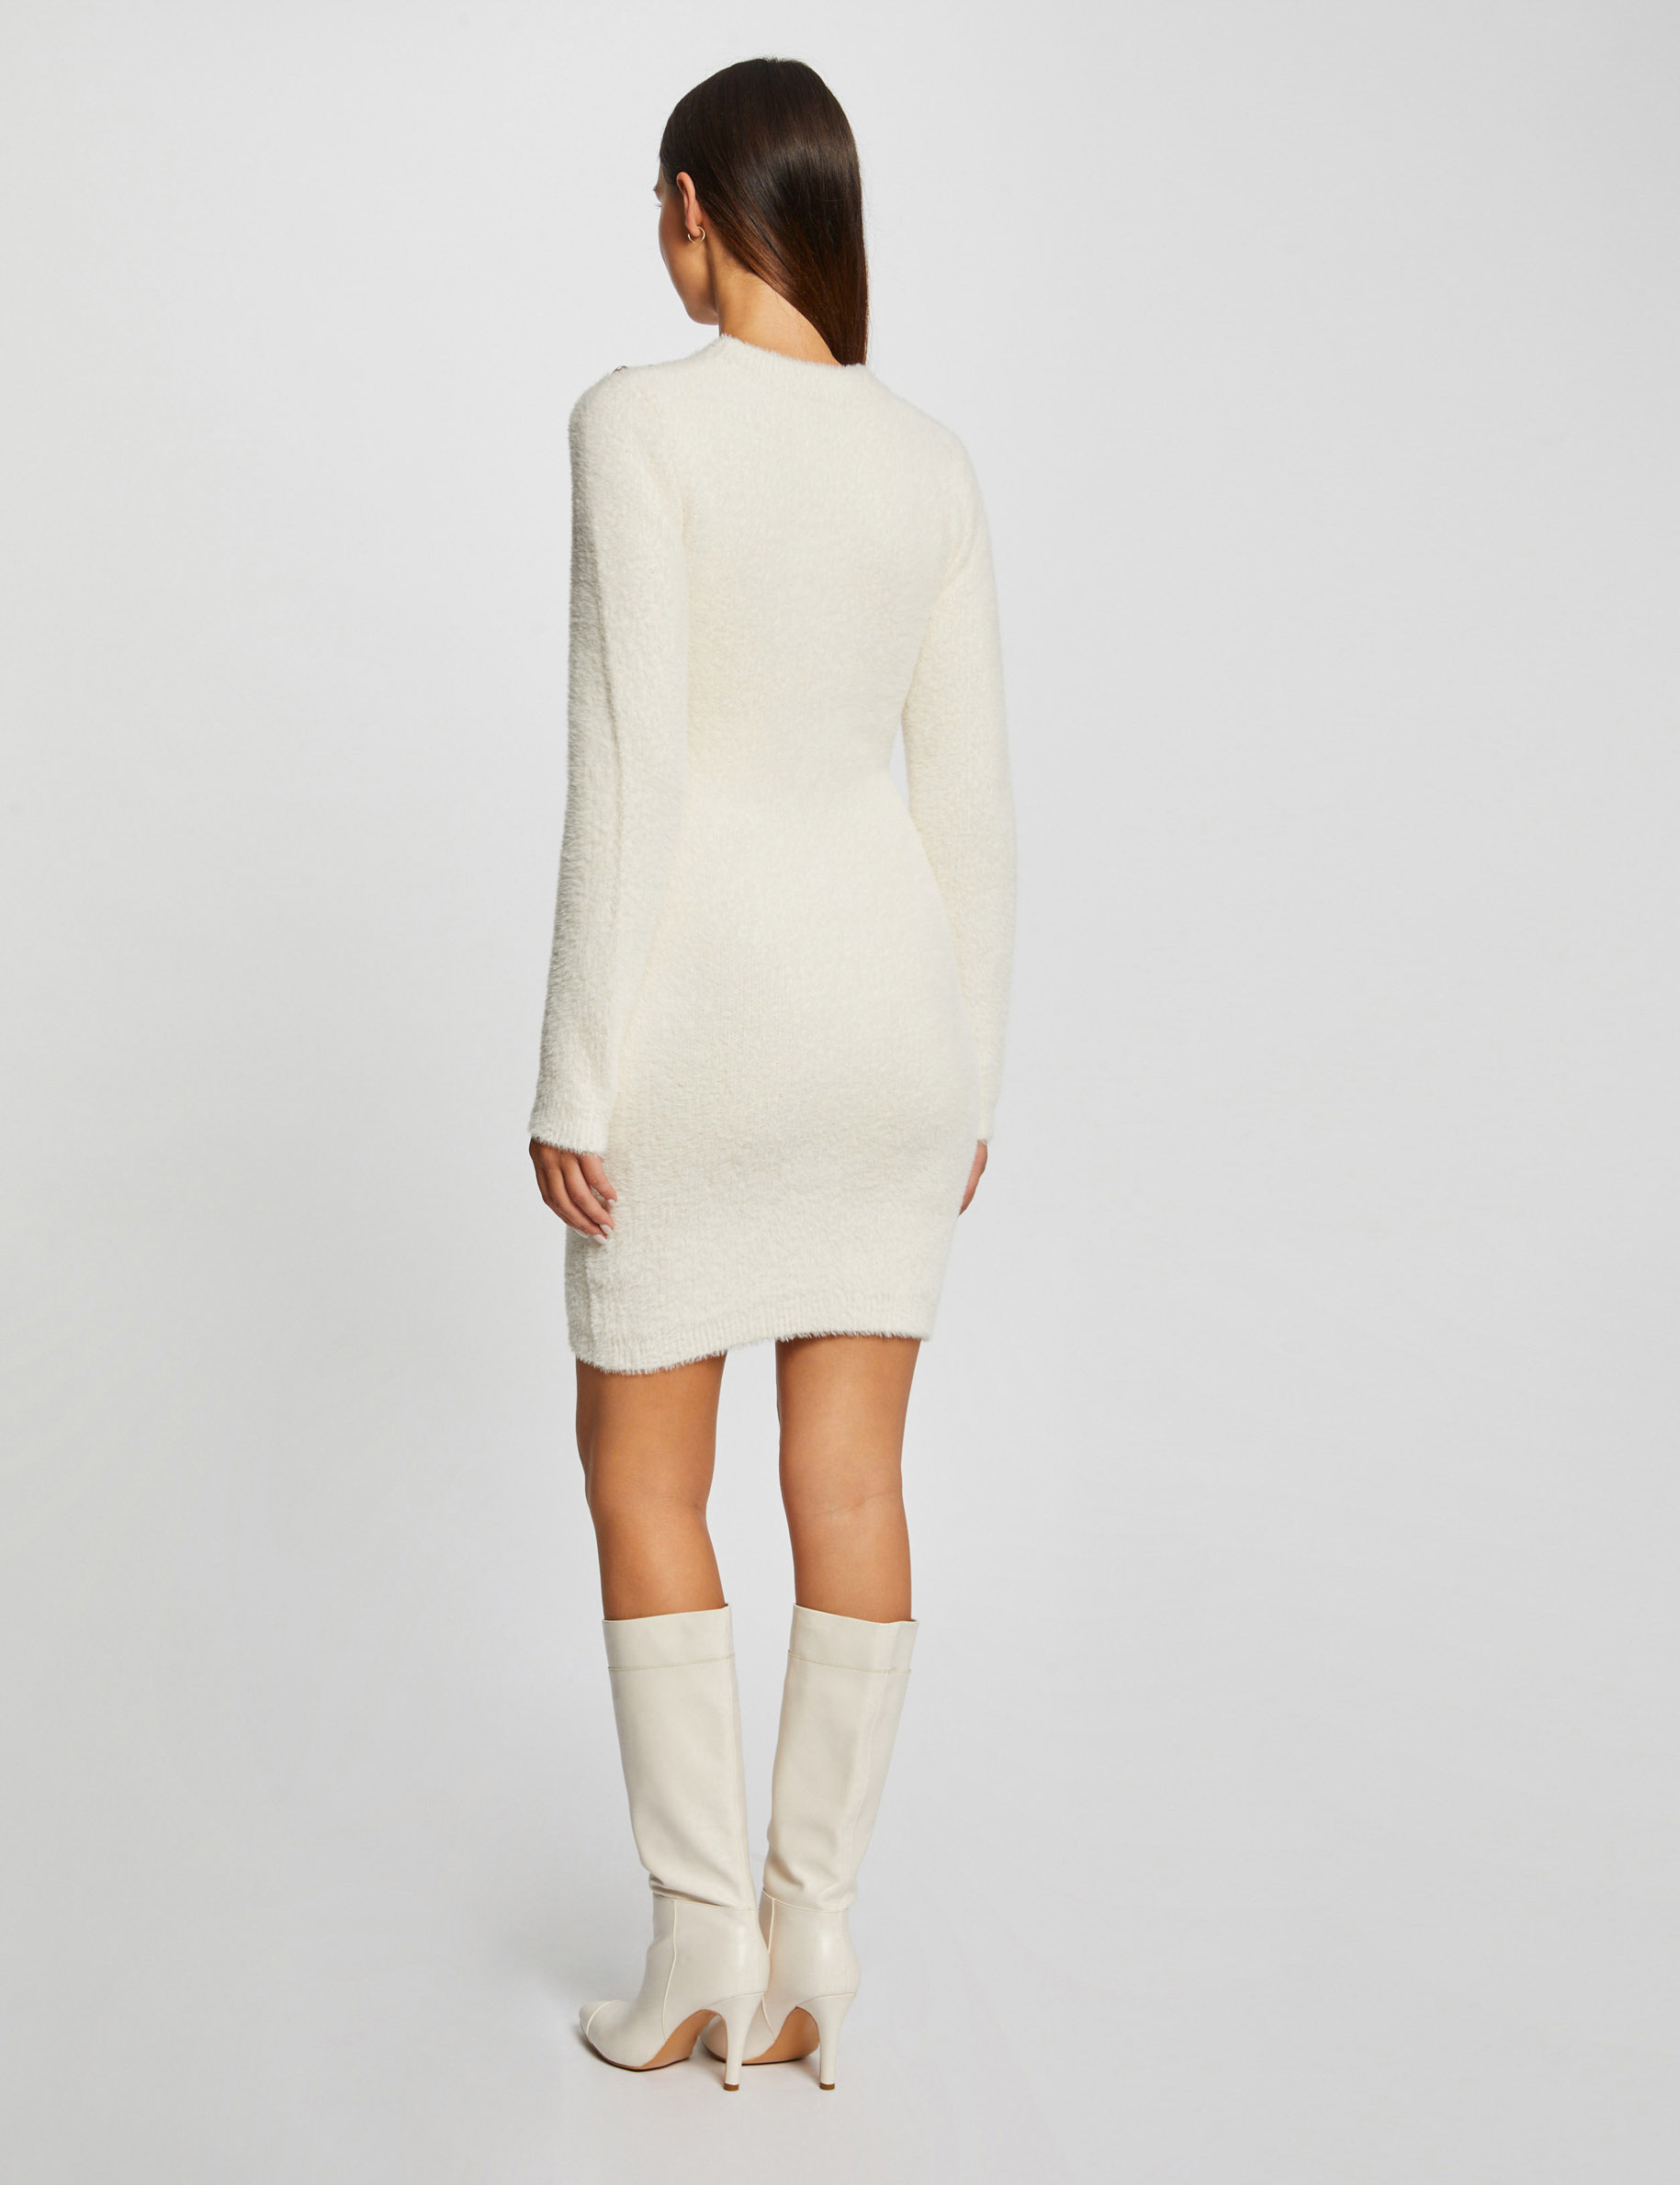 Fitted jumper dress fluffy knit ivory ladies